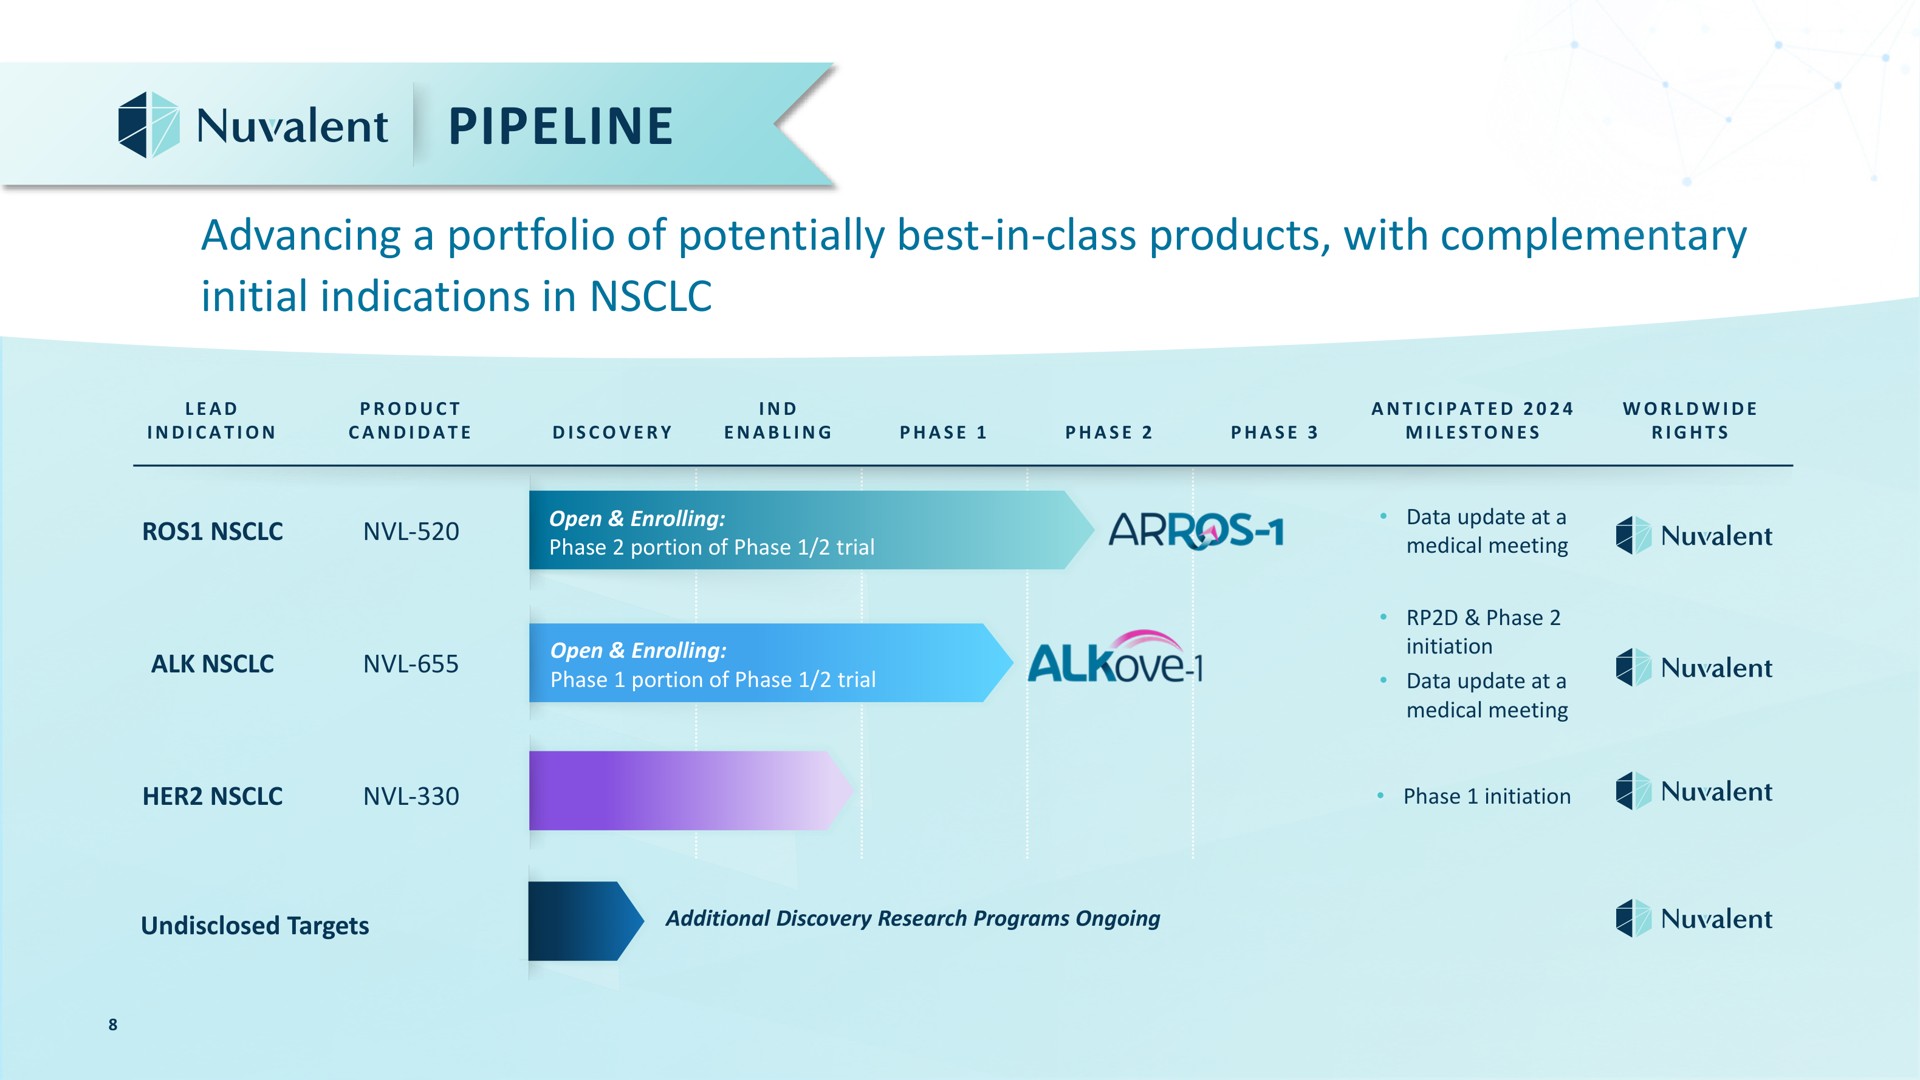 pipeline advancing a portfolio of potentially best in class products with complementary initial indications in lead indication product candidate discovery enabling phase phase phase anticipated milestones rights open enrolling phase portion phase trial data update at medical meeting alk open enrolling phase portion phase trial i phase initiation data update at medical meeting her phase initiation undisclosed targets additional discovery research programs ongoing | Nuvalent